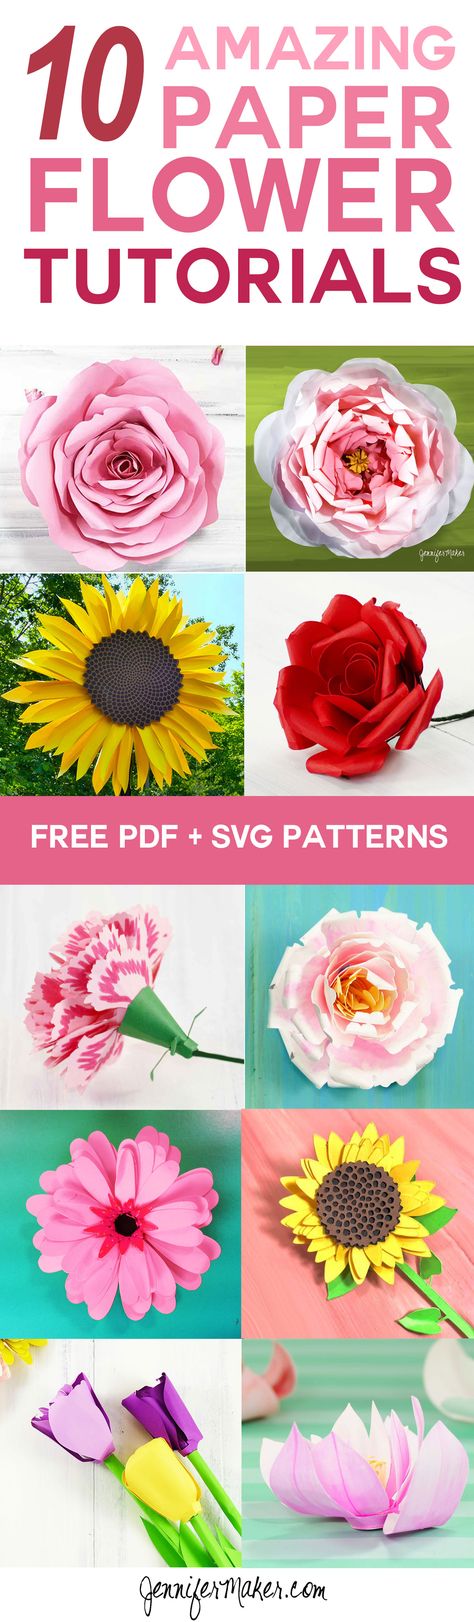 10 Paper Flower Tutorials with Free PDF/SVG Patterns | How to Make DIY Paper Flowers Diy, Paper Crafts, Paper Flowers, Paper Flower Patterns, How To Make Paper Flowers, Paper Flowers Craft, Easy Paper Flowers, Paper Flowers Diy, Flower Making